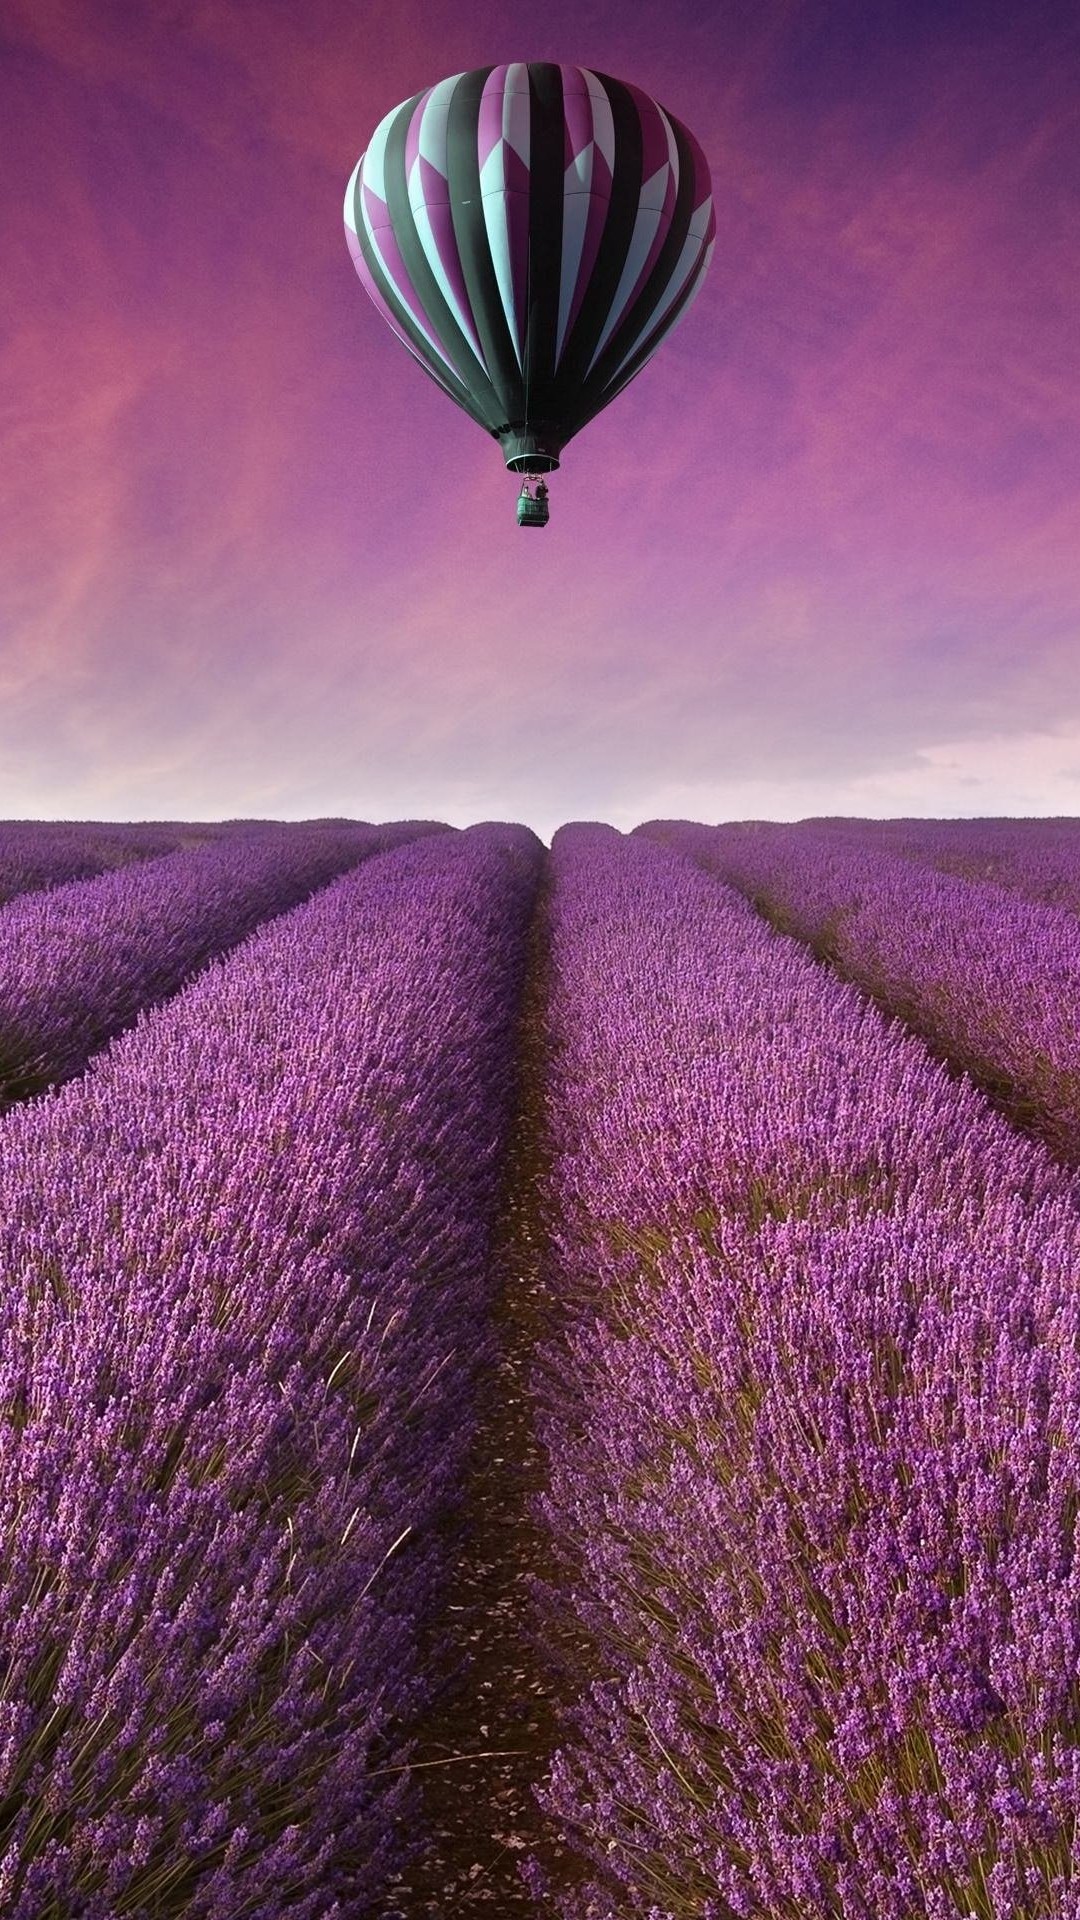 Hot Air Balloon Over Lavender Field Wallpaper for SONY Xperia Z1